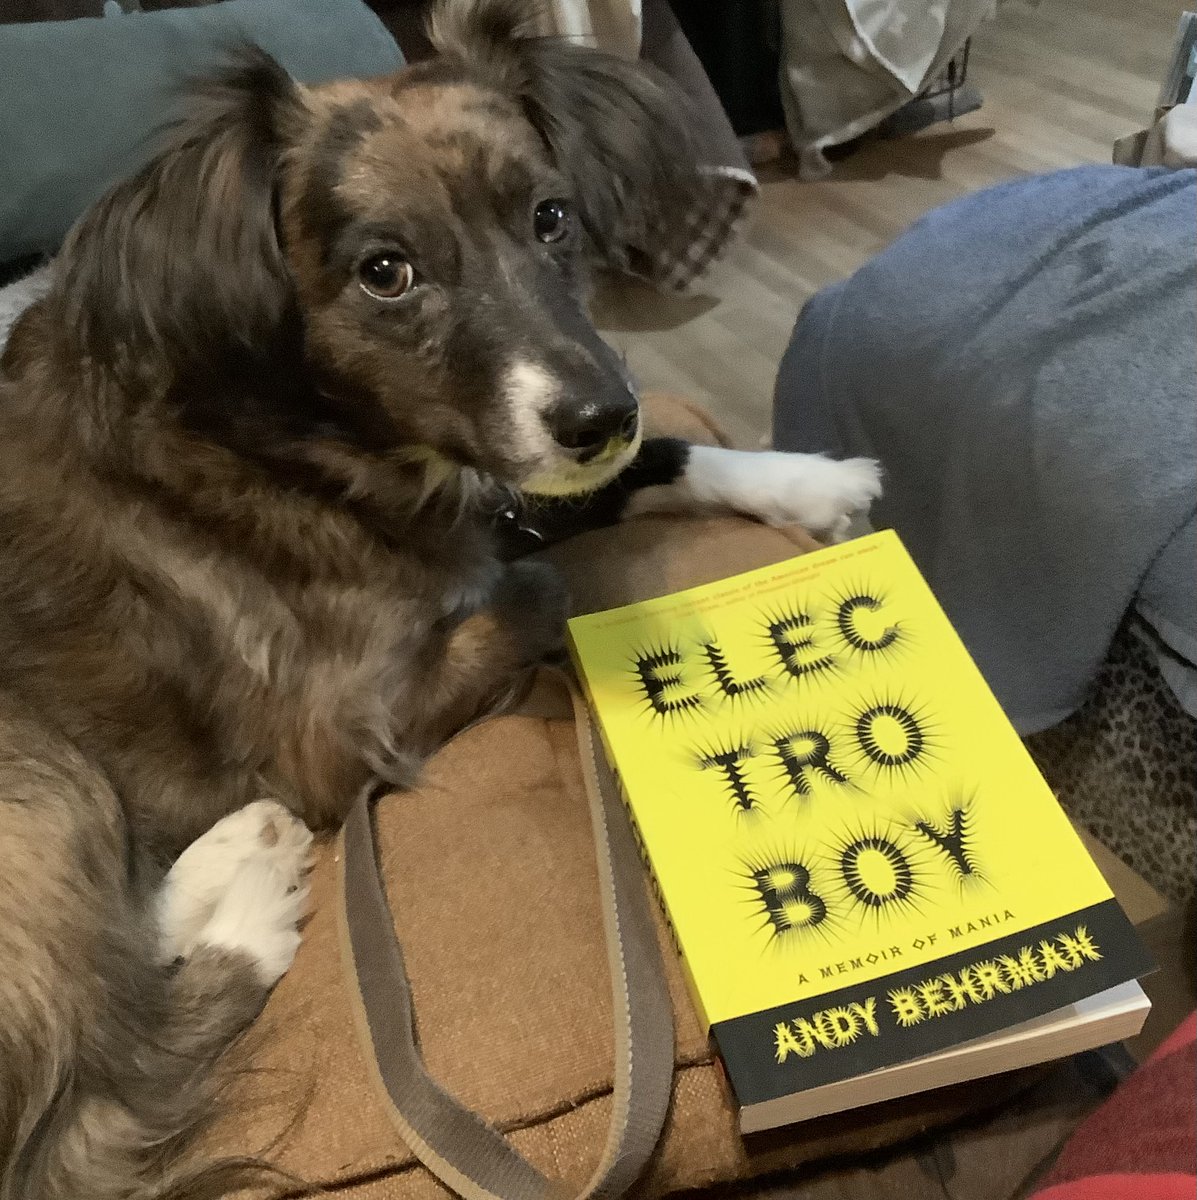 Smudge HIGHLY Recommends “ELECTROBOY” to everybody!! He can’t step away from it! @electroboyusa